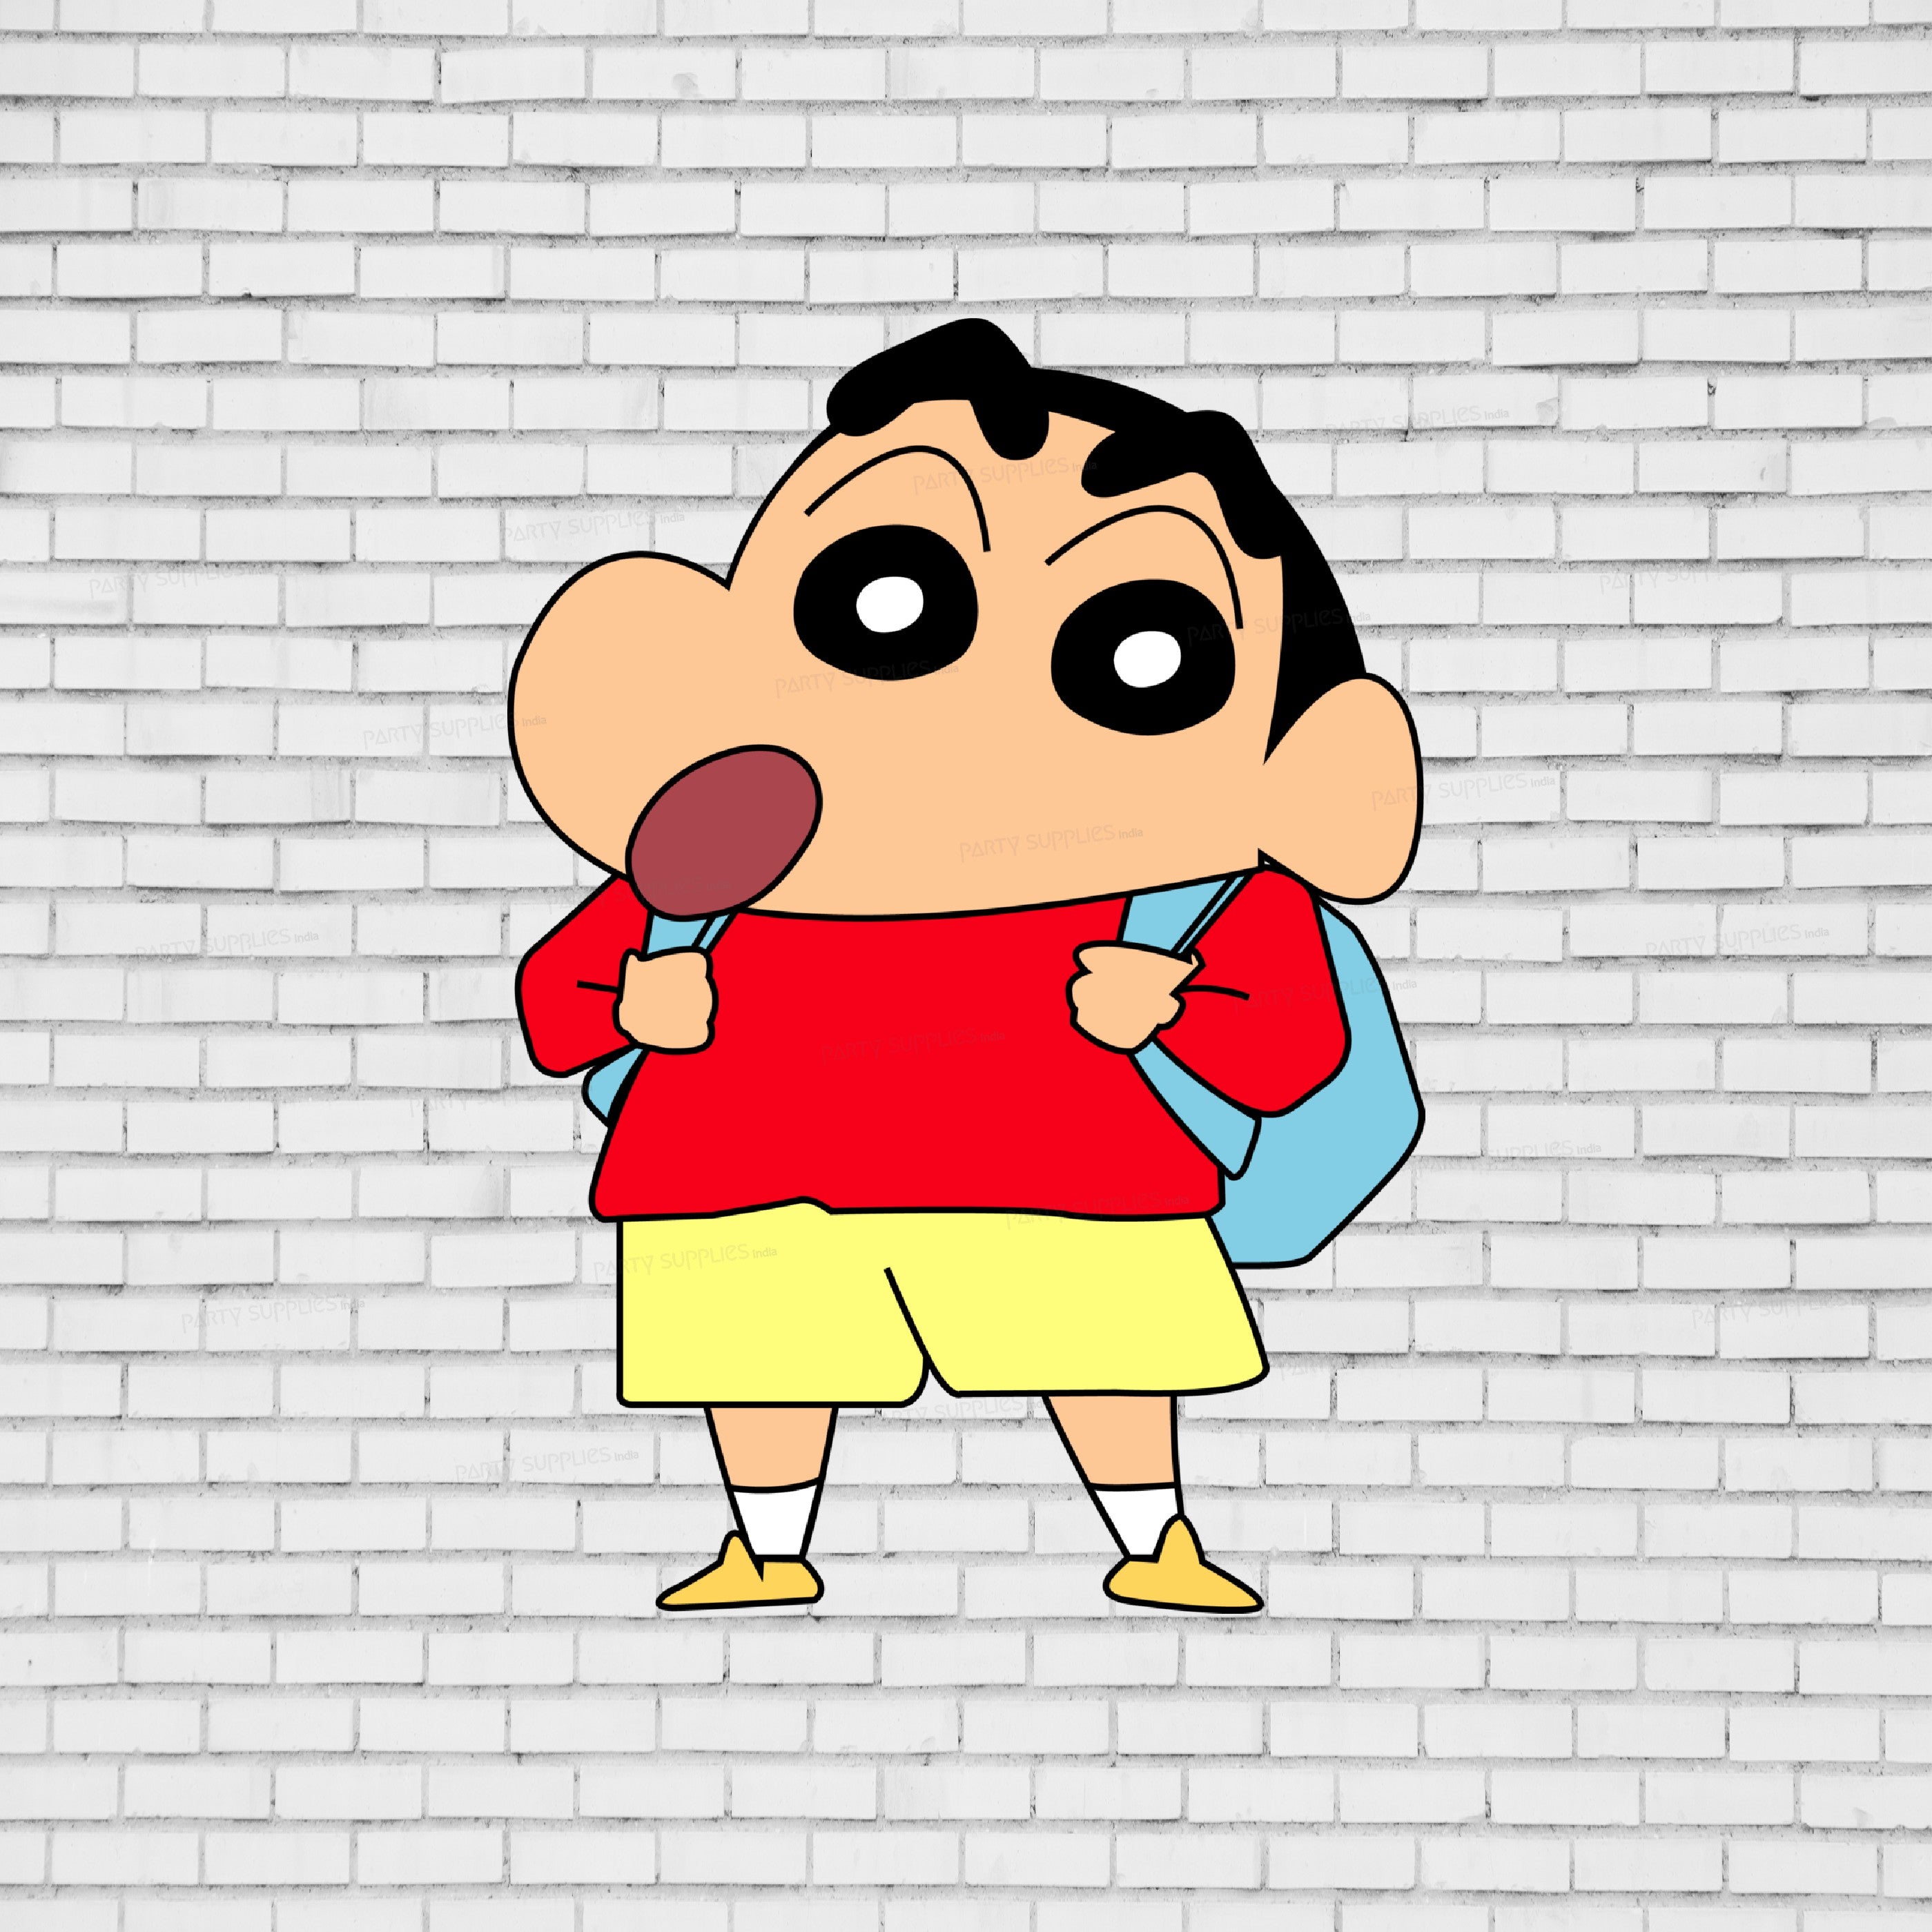 Todfod Wooden Jigsaw Puzzles Shinchan Anime Cartoon Characters For Kids 54  Pieces - Wooden Jigsaw Puzzles Shinchan Anime Cartoon Characters For Kids  54 Pieces . shop for Todfod products in India. | Flipkart.com